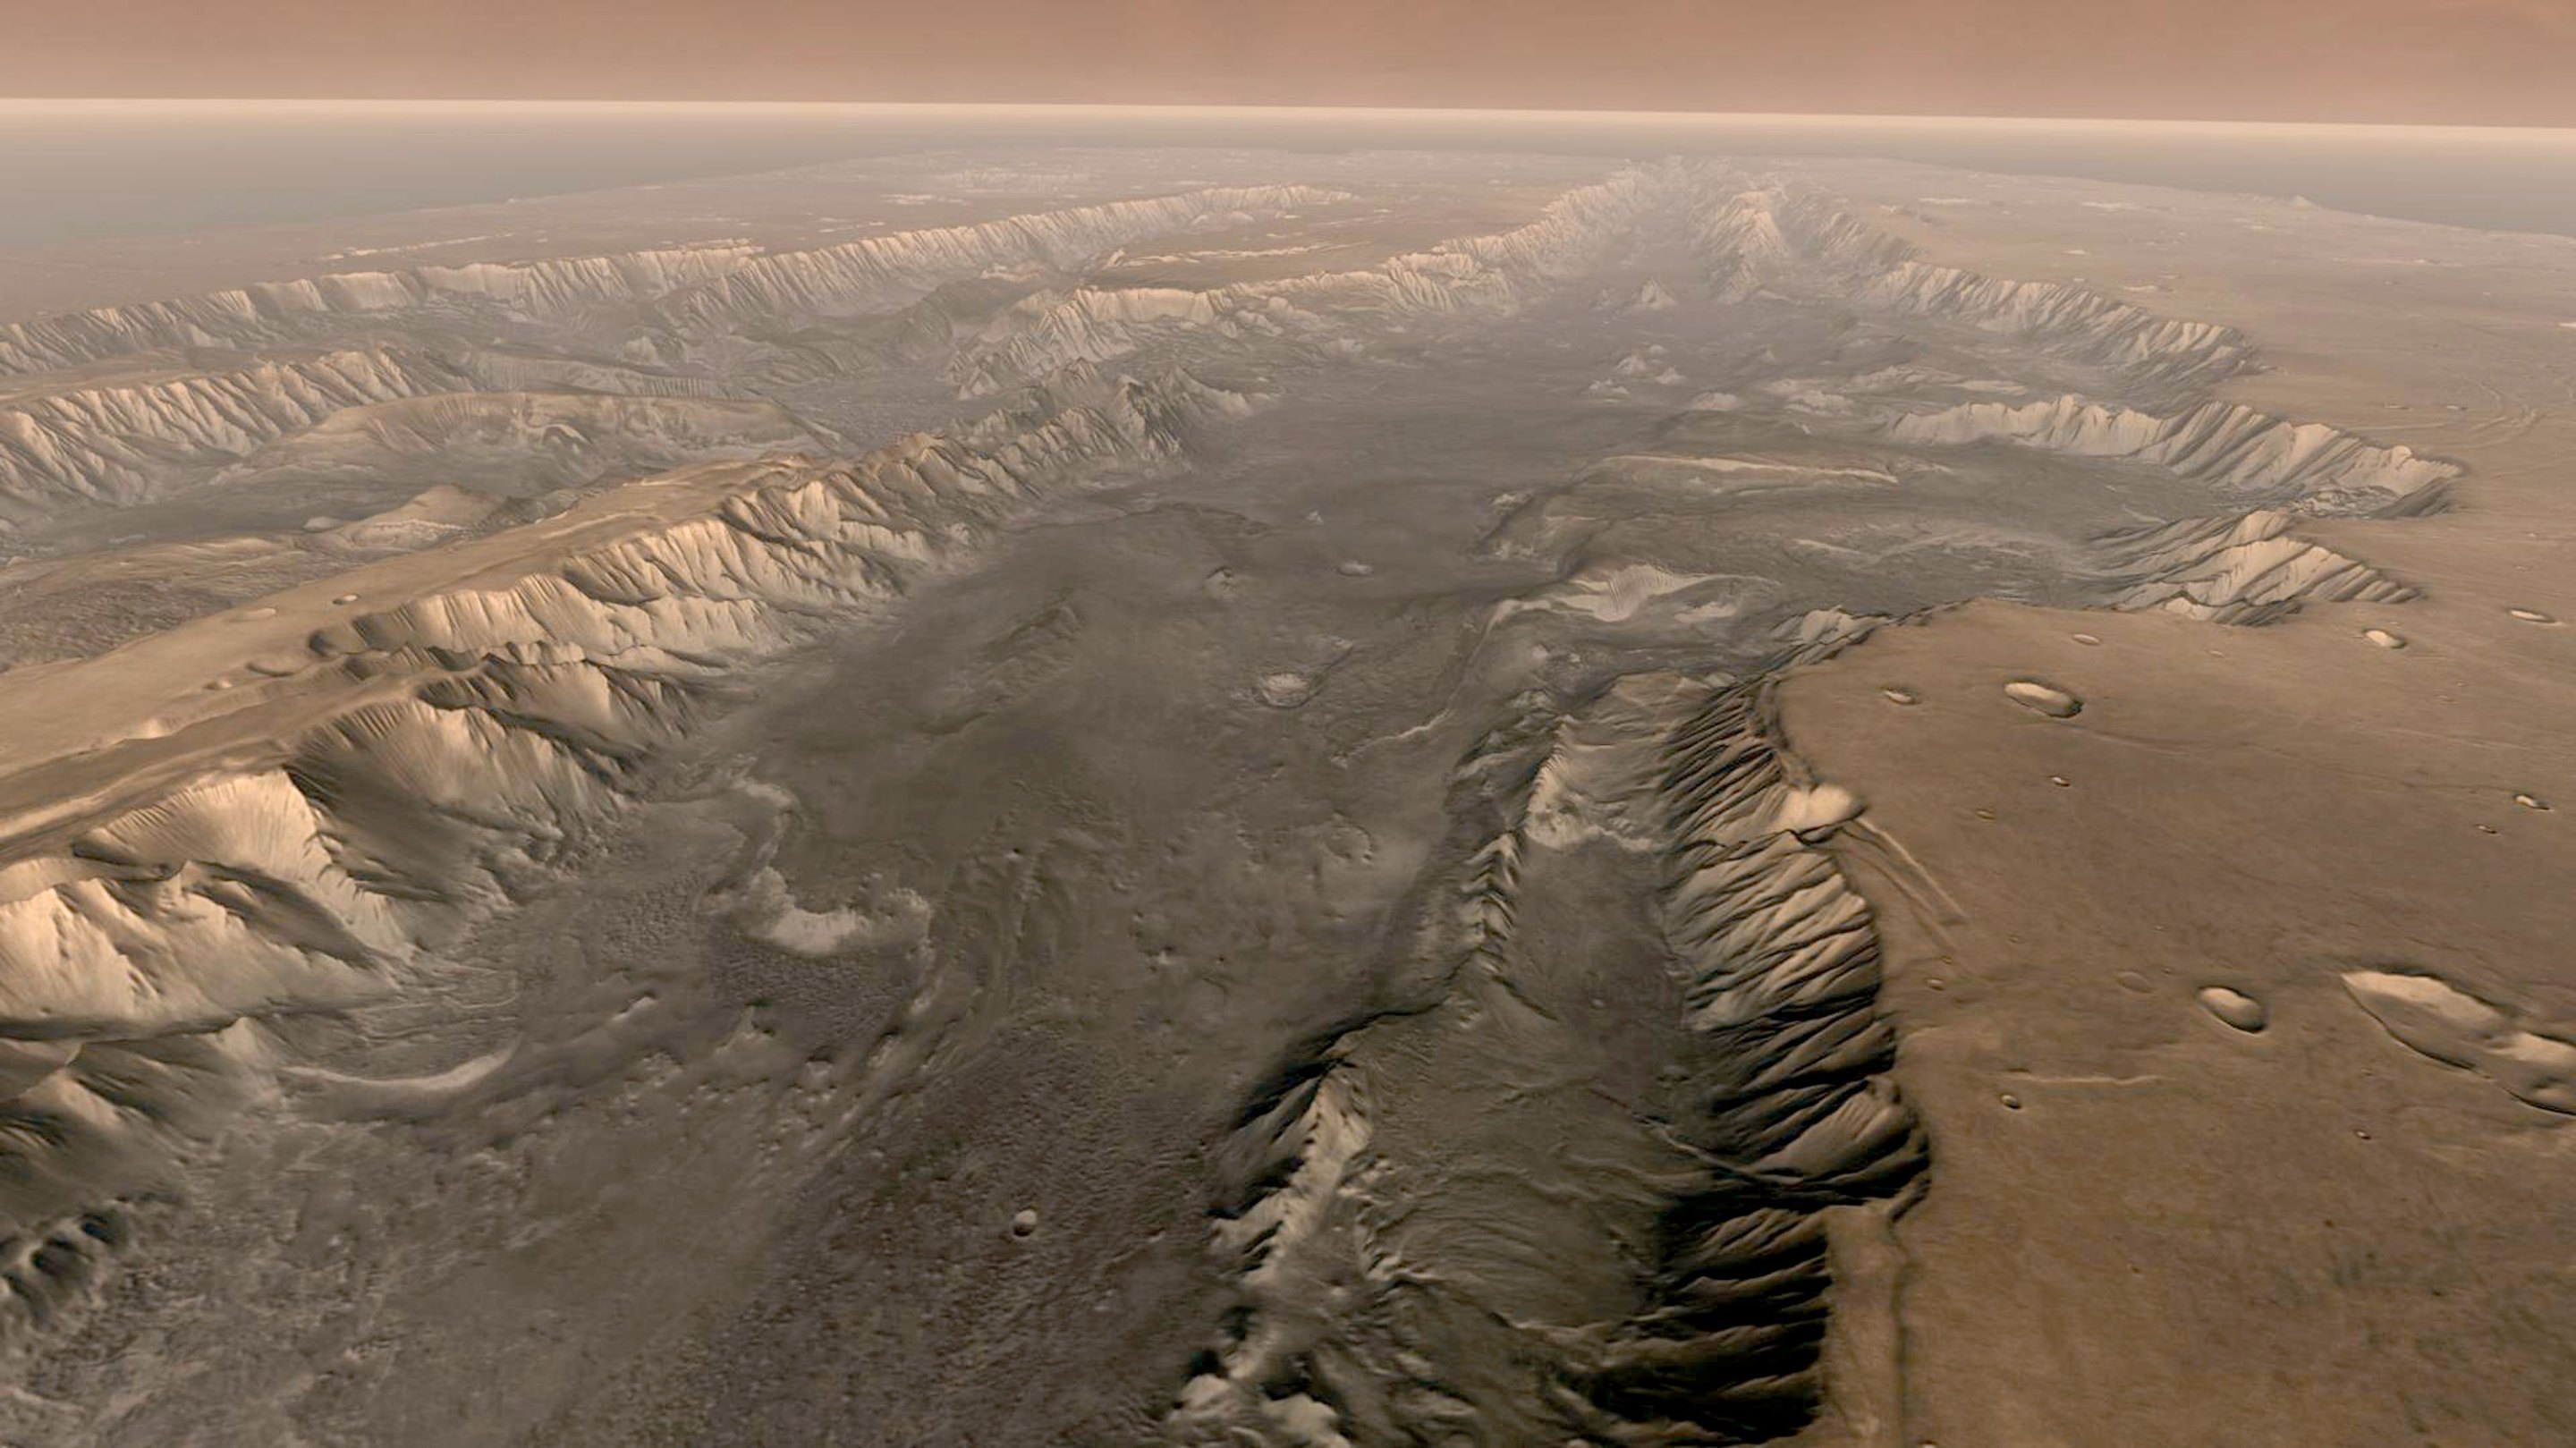 VALLES MARINERIS, MARS - Mars' own Grand Canyon, Valles Marineris, is shown on the surface of the planet in this composite image made aboard NASA's Mars Odyssey spacecraft. The image was taken from a video featuring high-resolution images from Arizona State University's Thermal Emission Imaging System multi-band camera on board the spacecraft. The mosaic was then colored to approximate how Mars would look to the human eye. Valles Marineris is 10 times longer, five times deeper and 20 times wider than Earth's Grand Canyon. (Photo by NASA/Arizona State University via Getty Images)